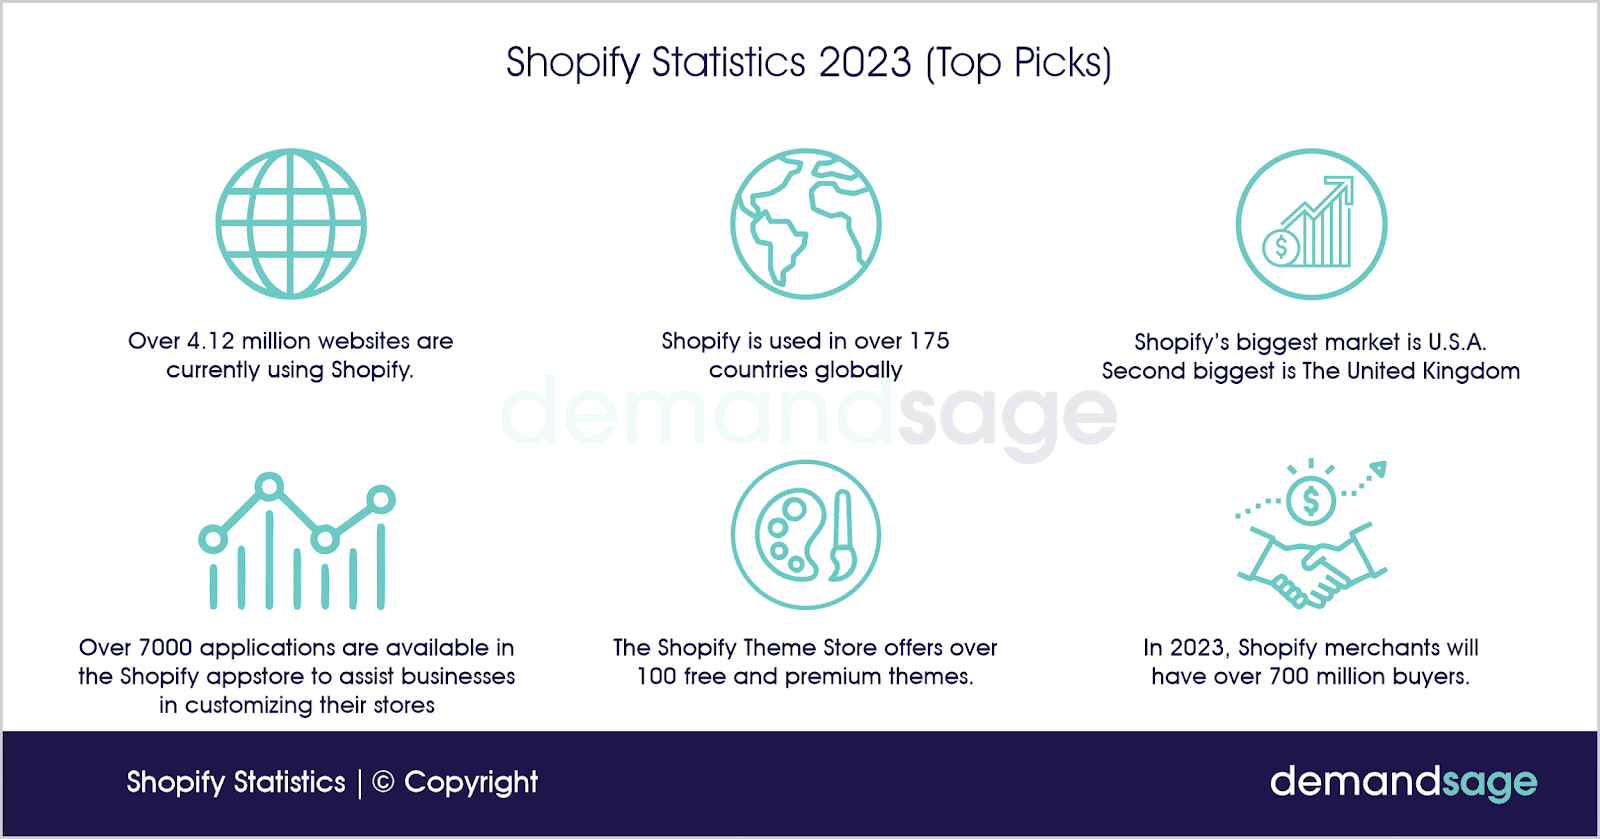 This infographic has all the top picks from the complete article of Shopify Statistics. 